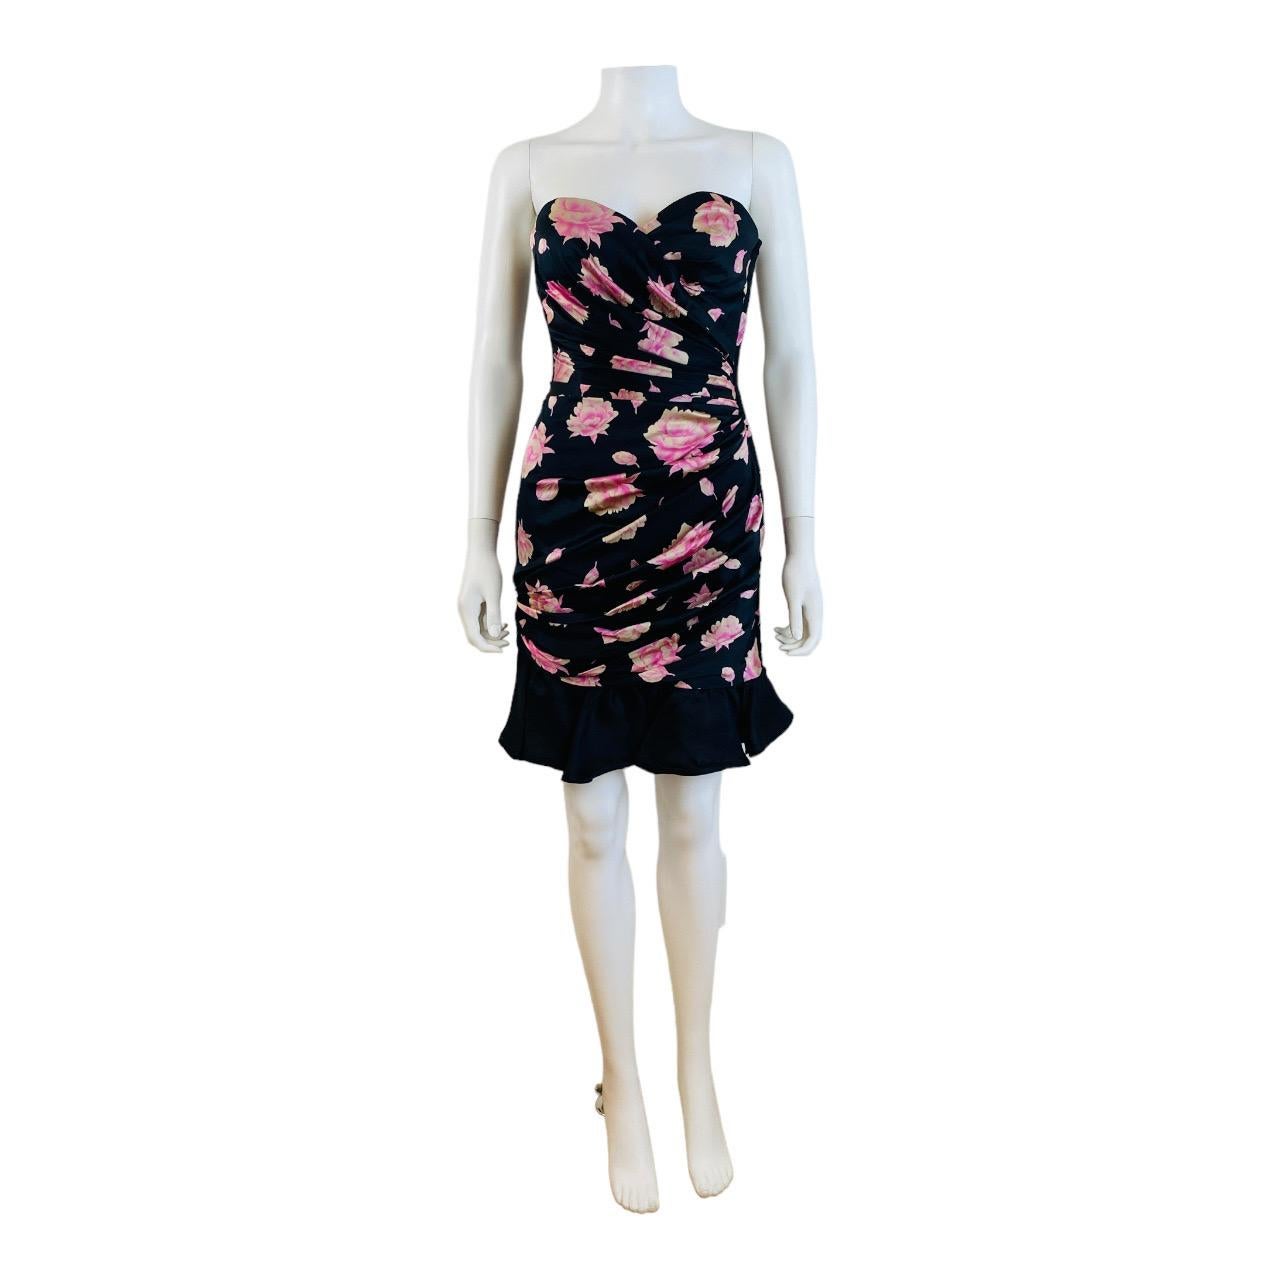 Gorgeous vintage Ungaro dress
Black silk with bright pink roses print throughout
Strapless
Sweetheart neckline
Crossover bust details
Boning on the bodice
Gathered fabric details at the left side at waist
Gathered fabric details on the right side at